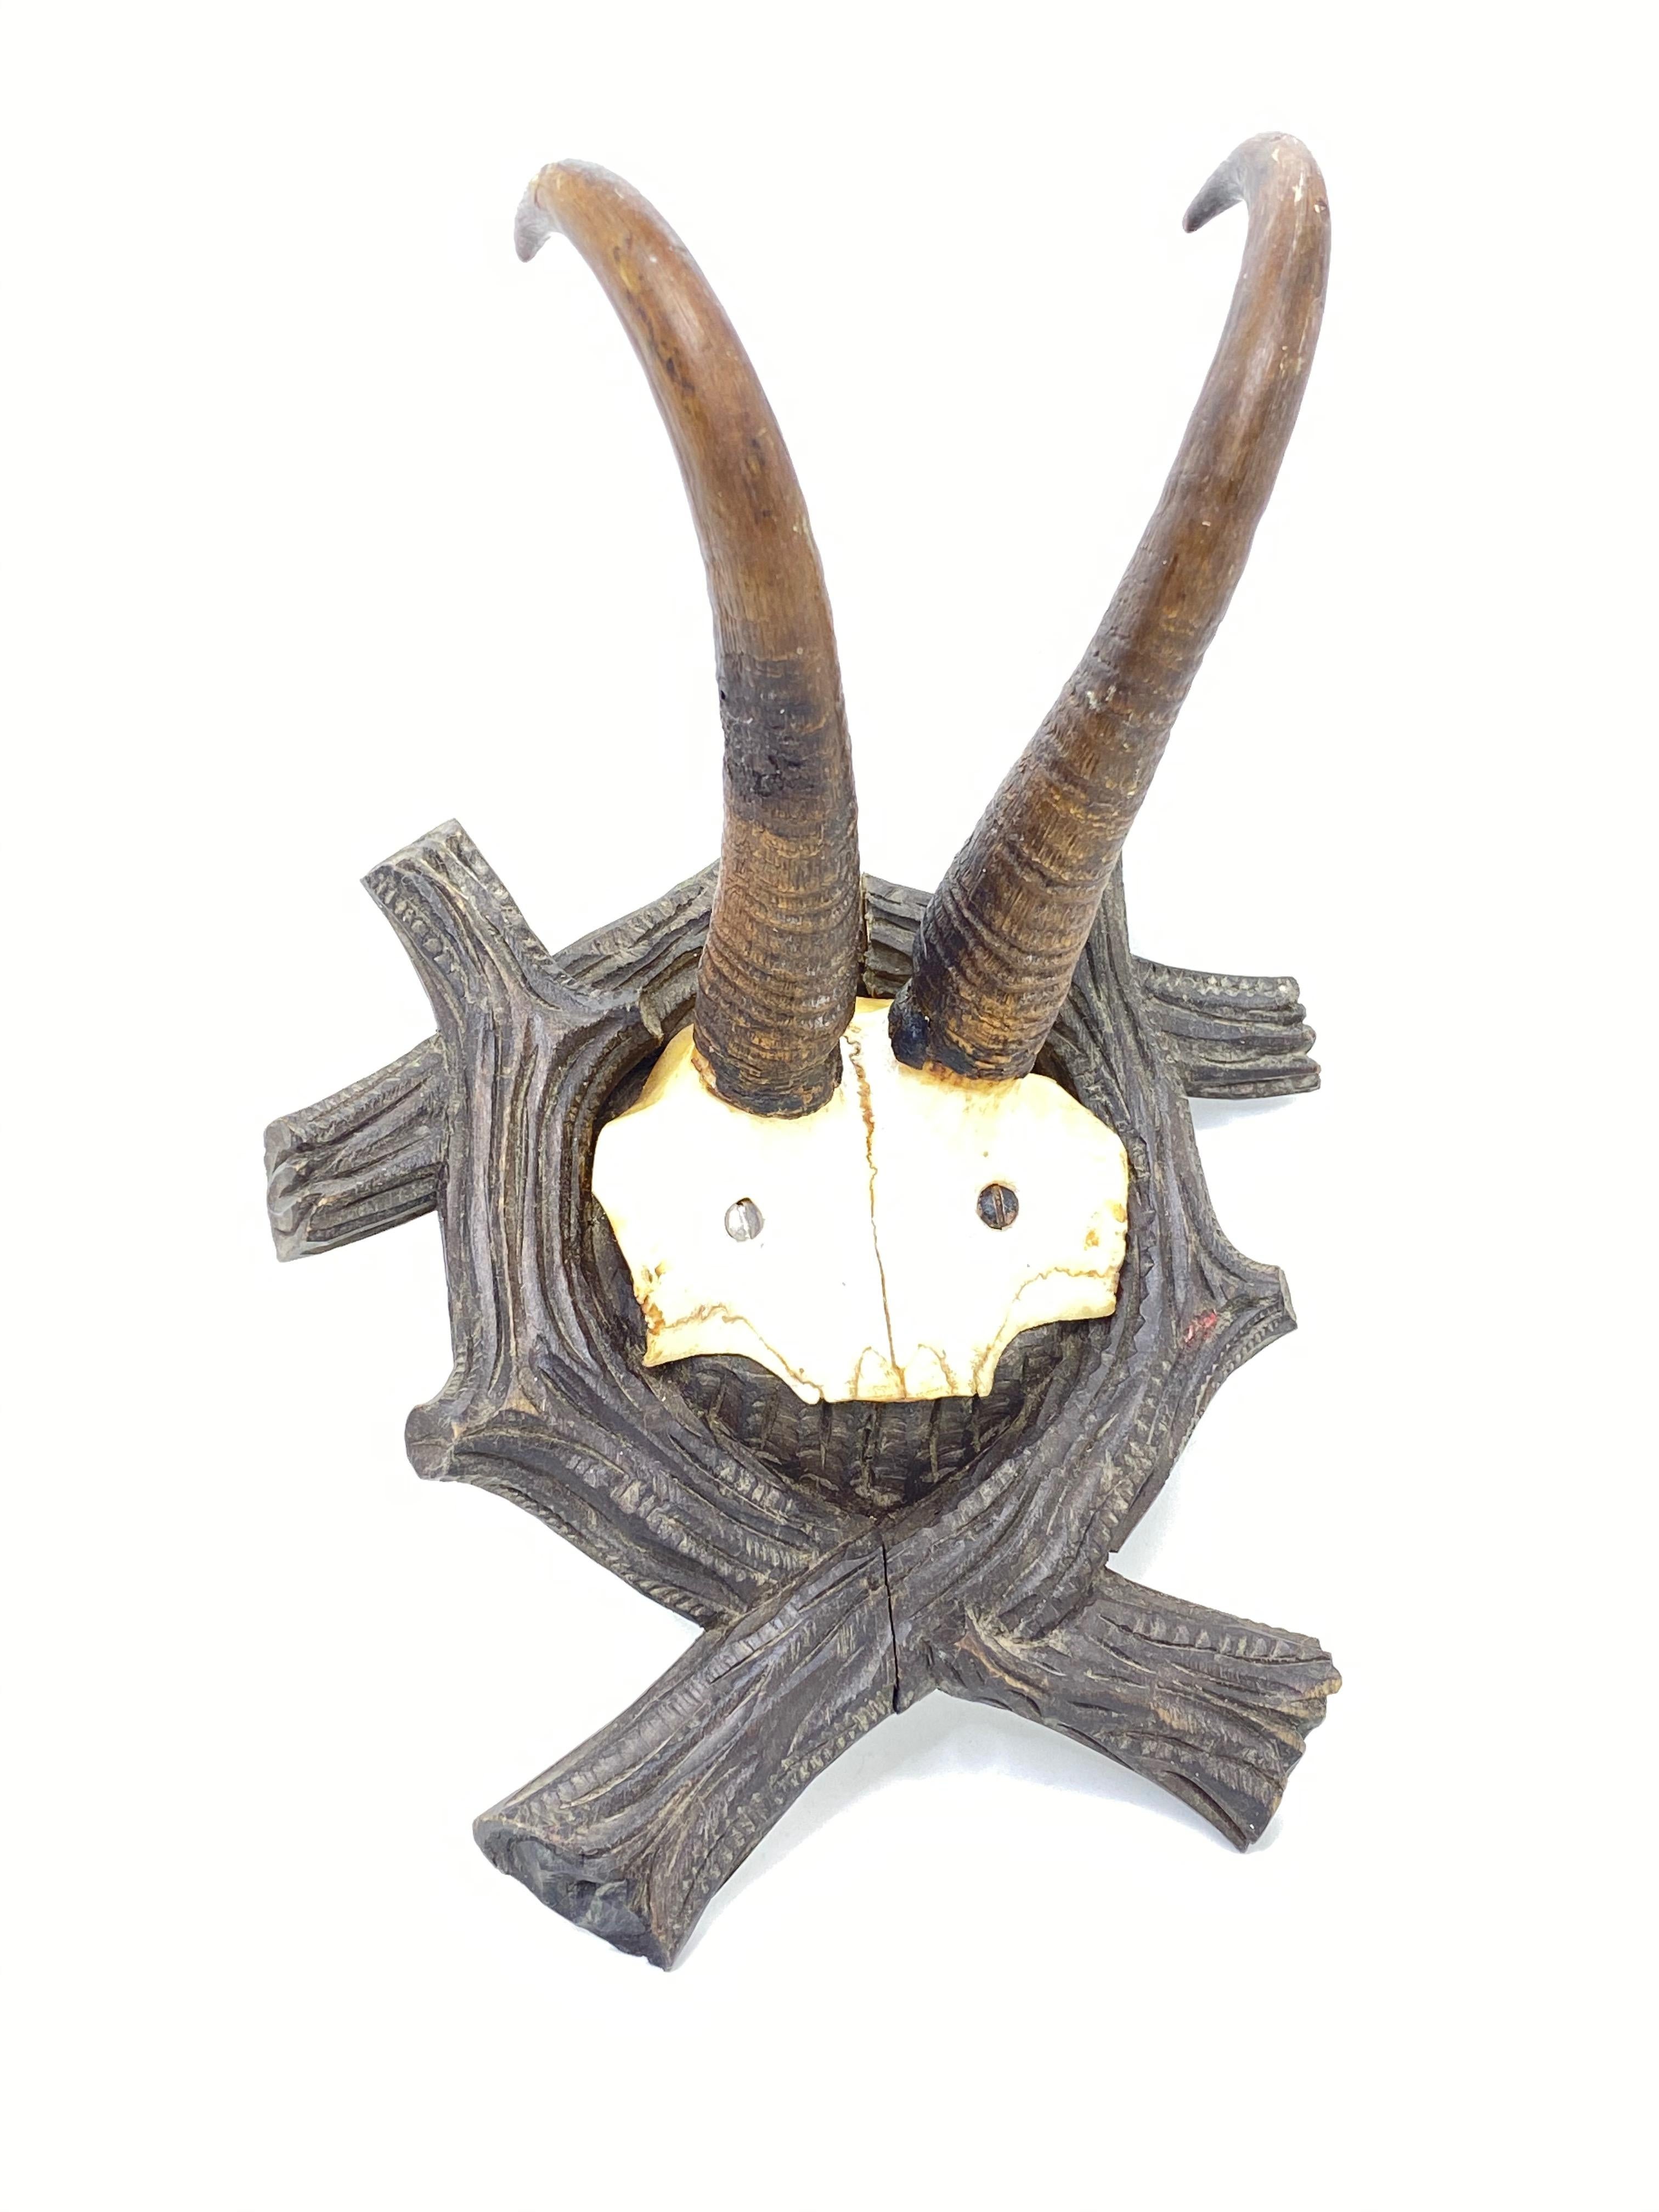 A beautiful antique Black Forest Chamois antler trophy on hand carved, Black Forest wooden plaque. A nice addition to your hunters loge or just to display it in your house.